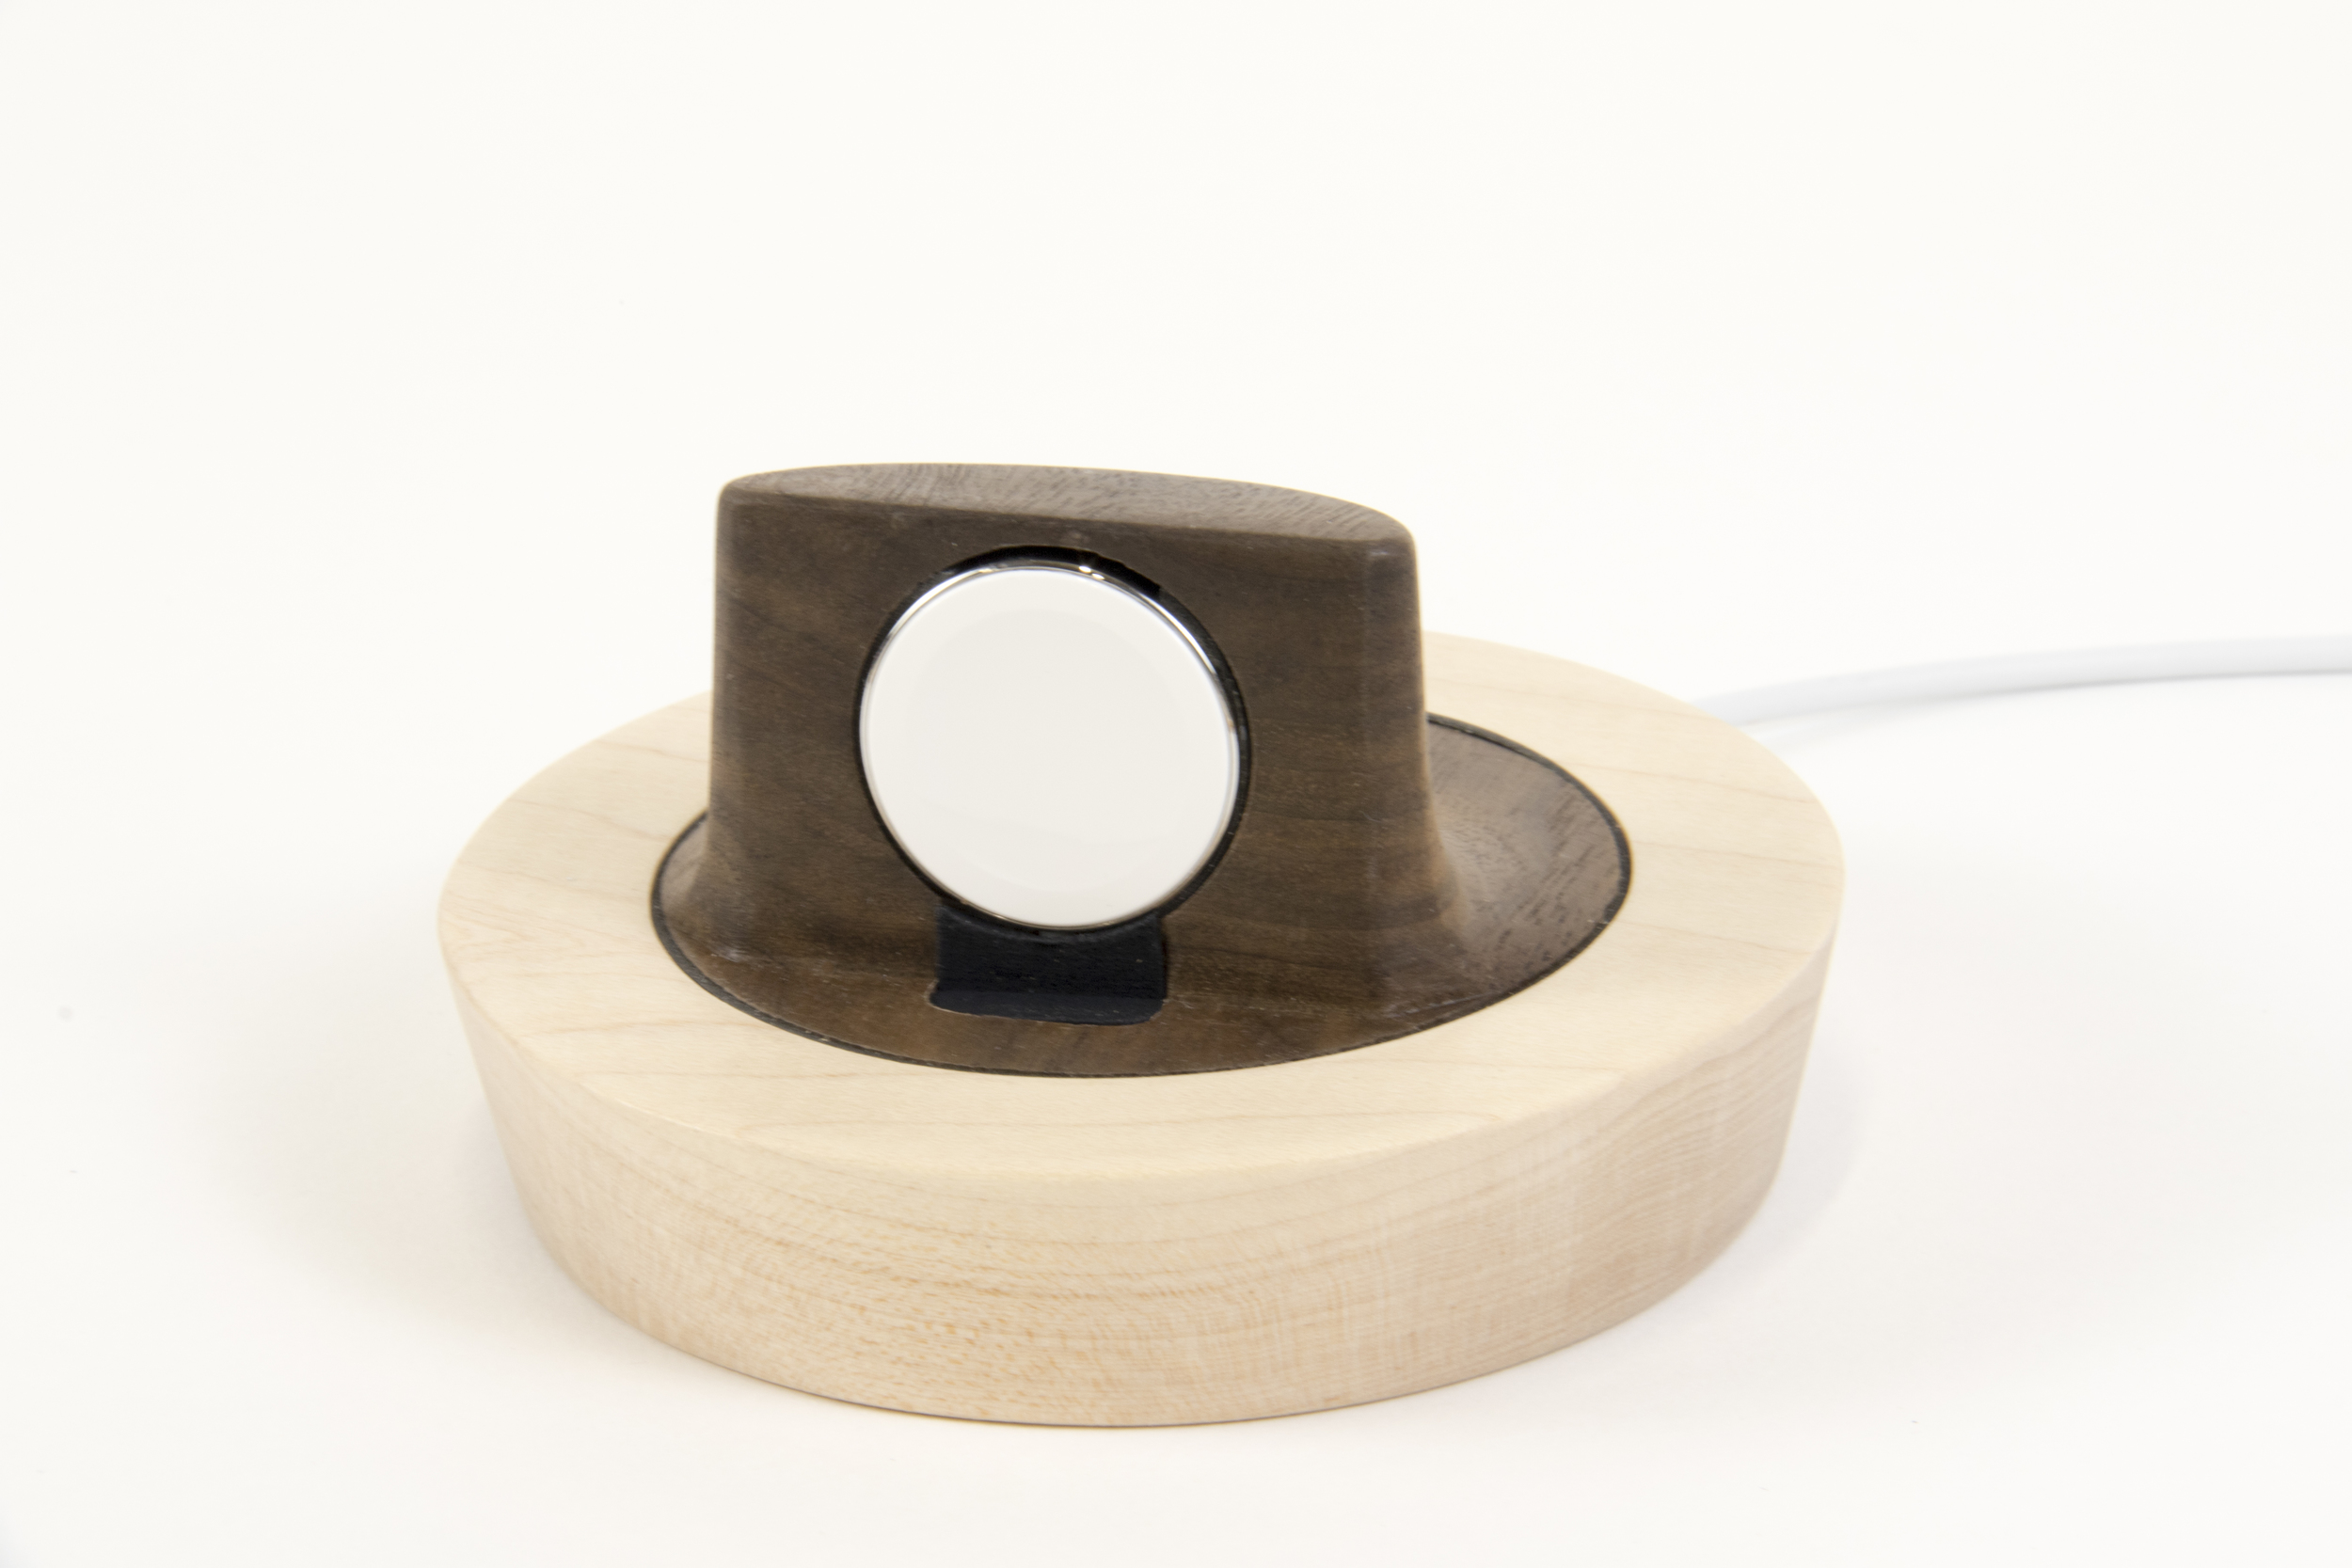 The Saucer for Apple Watch: Walnut core with Maple ring